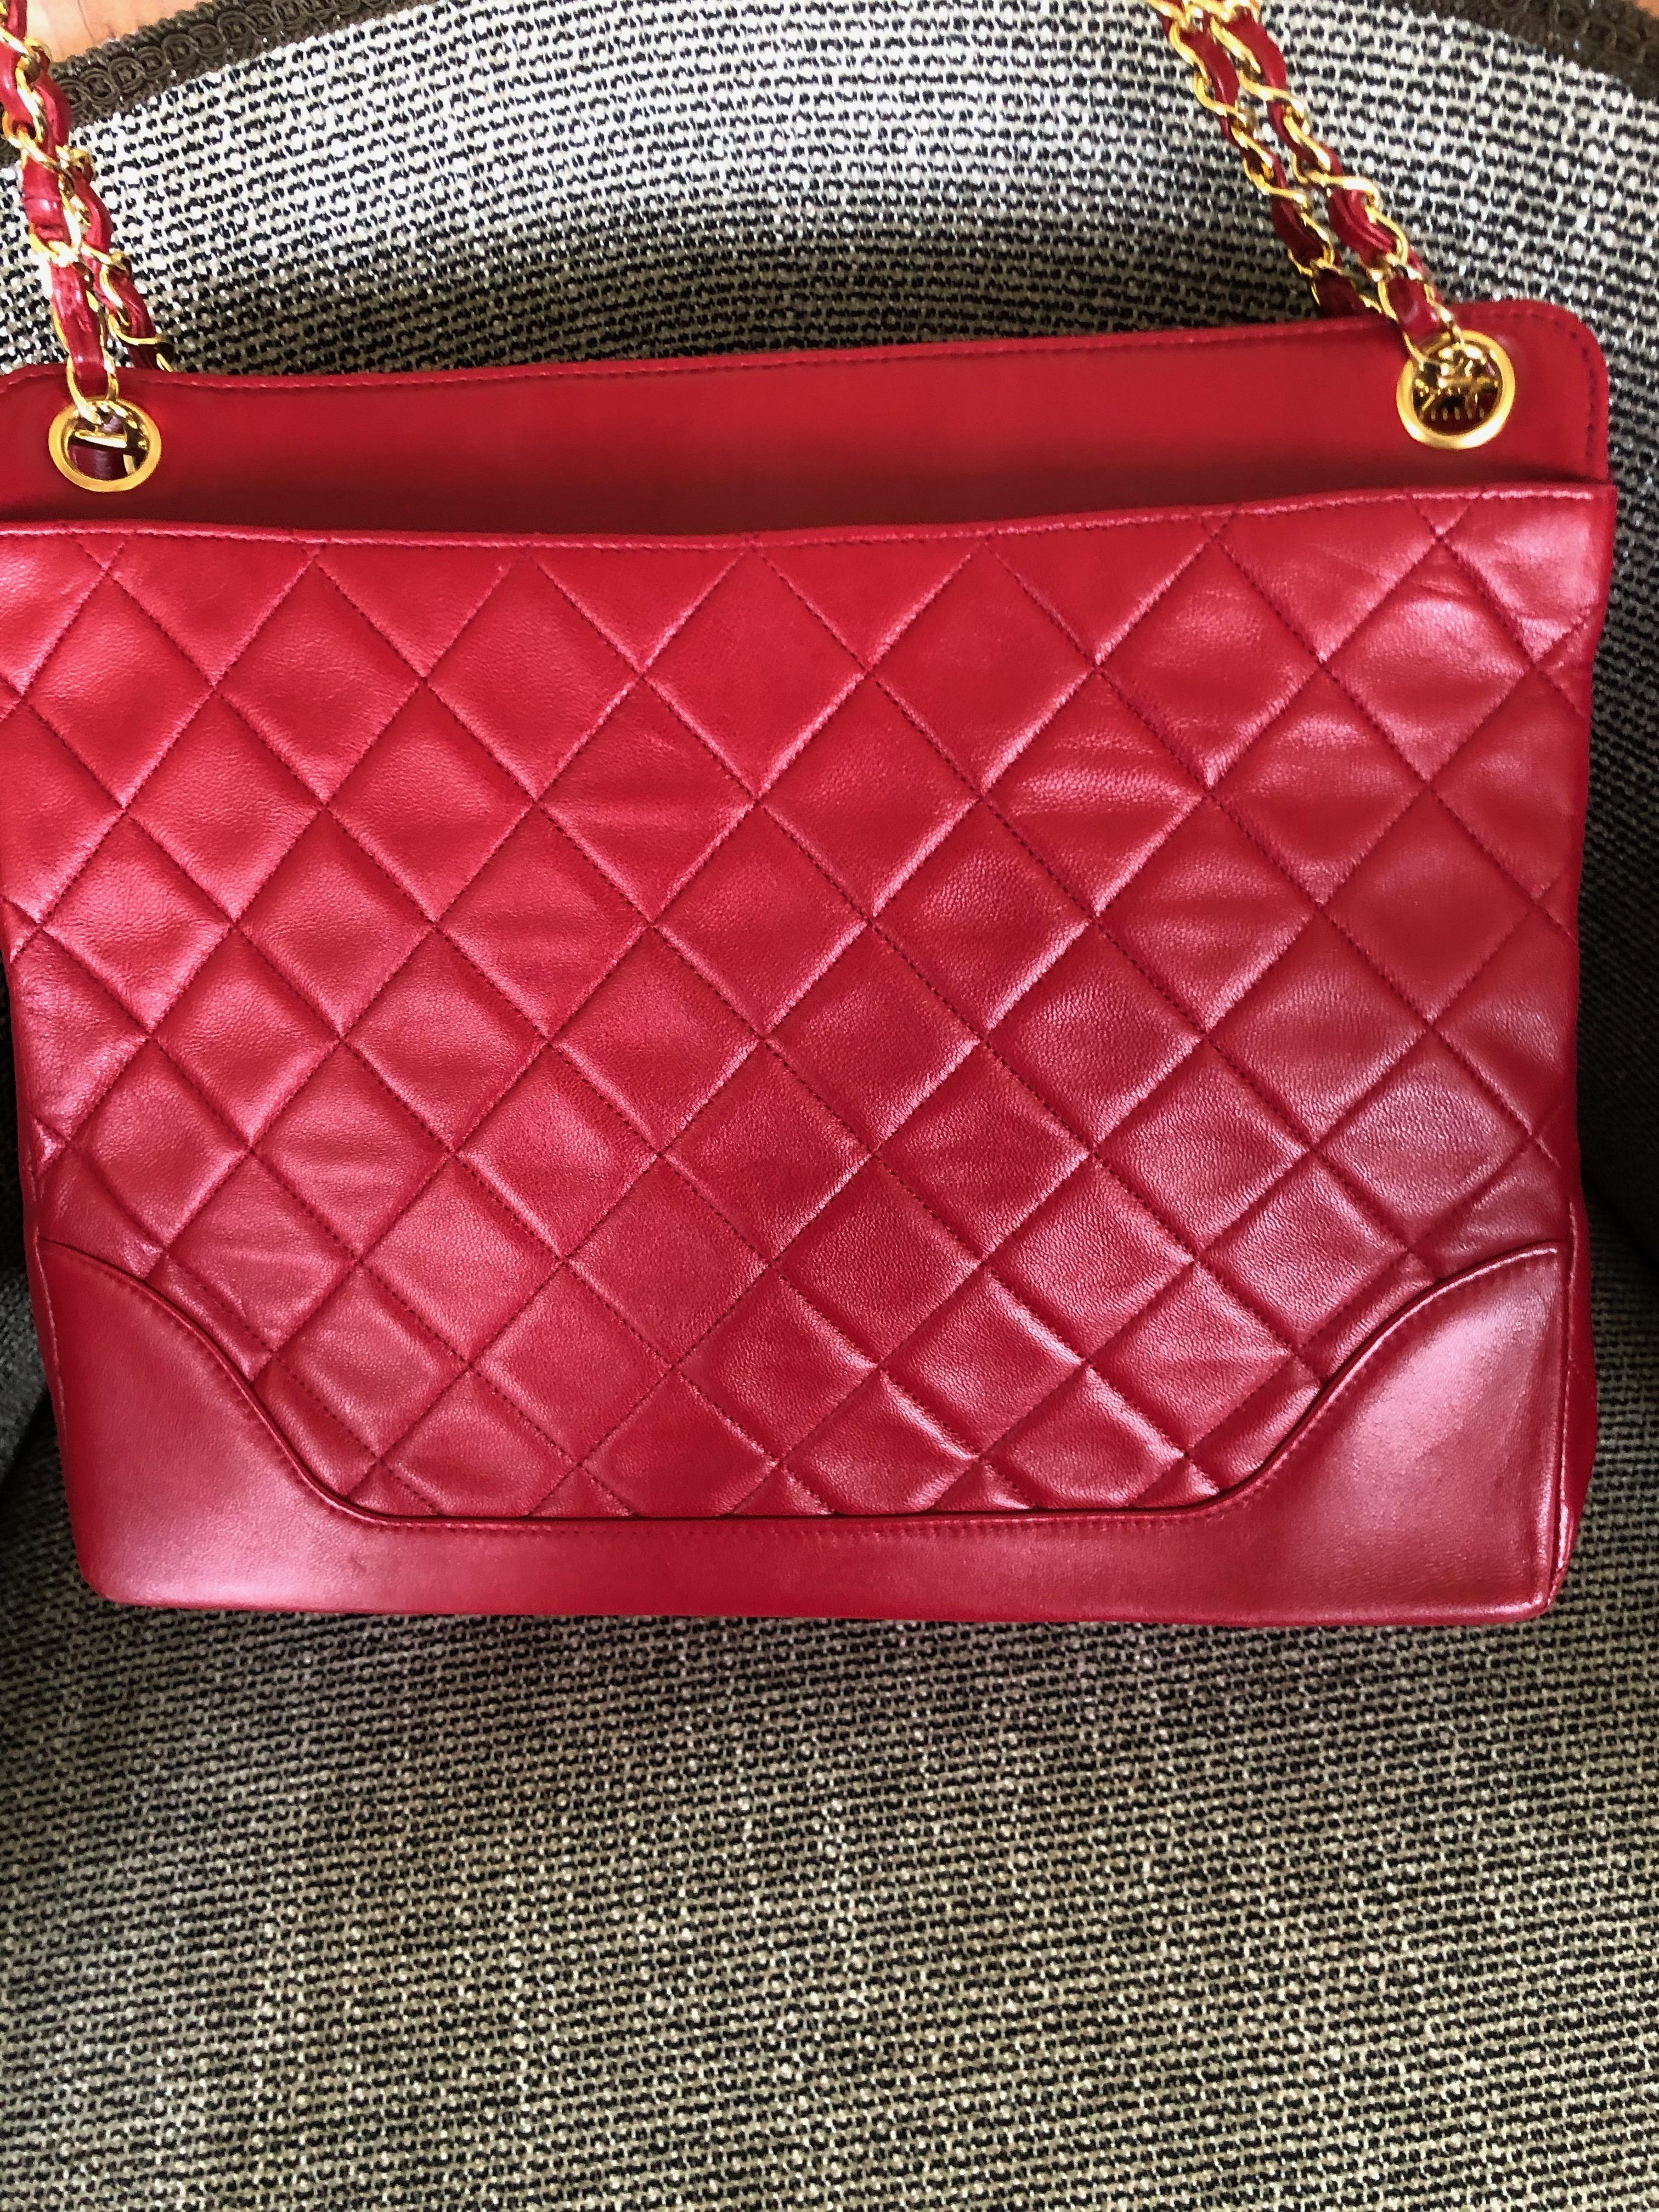 Chanel Tomato Red Vintage Lambskin Leather Quilted Tote Bag with Gold Hardware For Sale 2